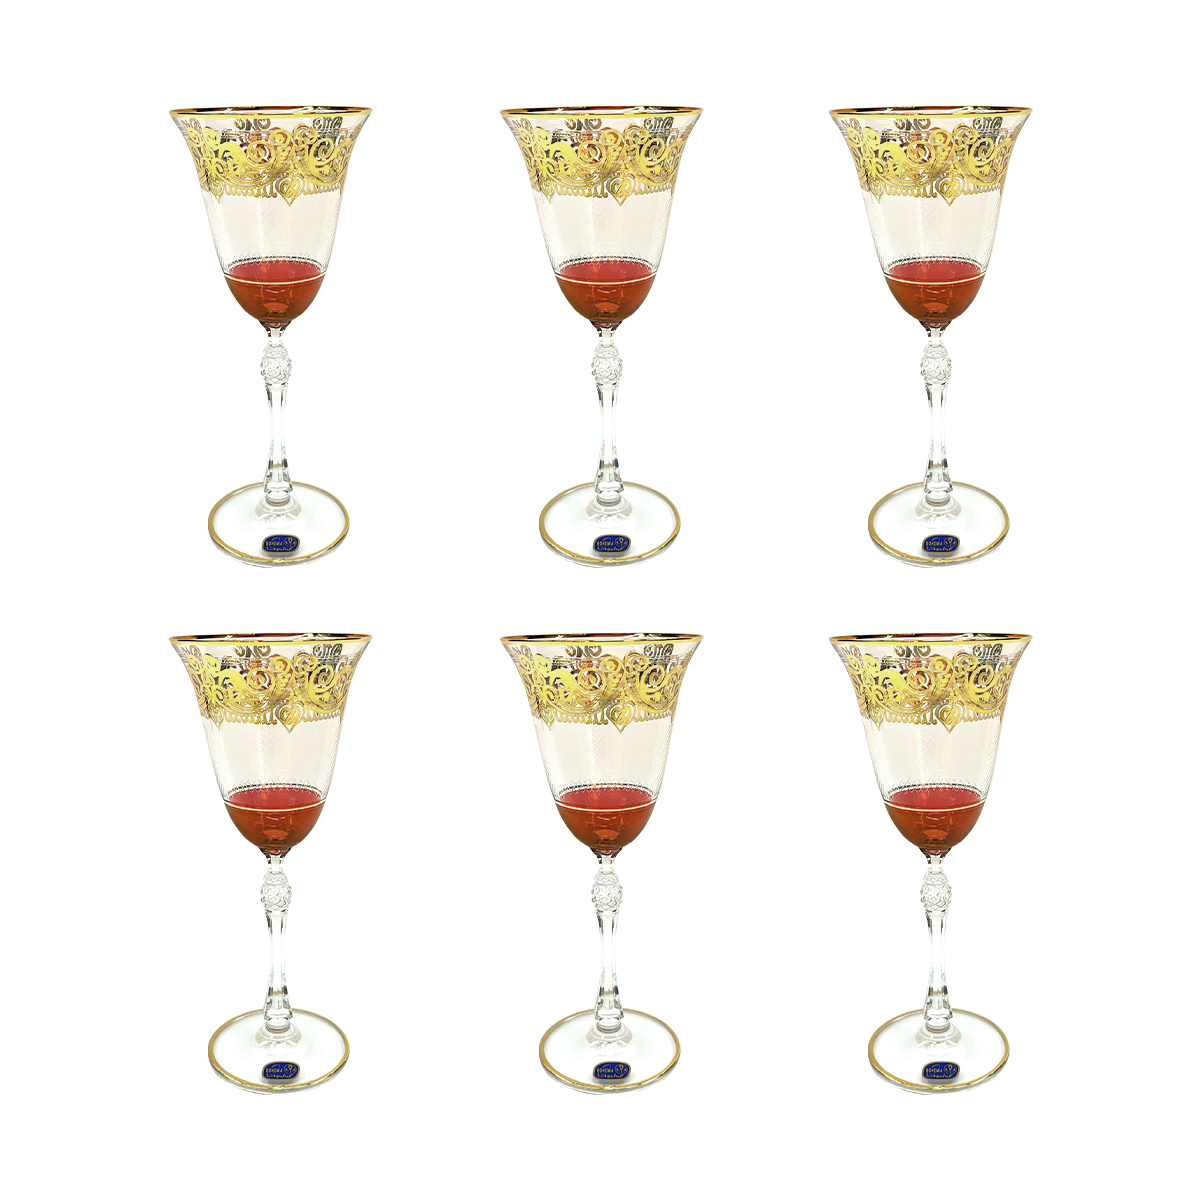 Bohemia Crystal Goblet Set, 6 Pieces -Red & Gold